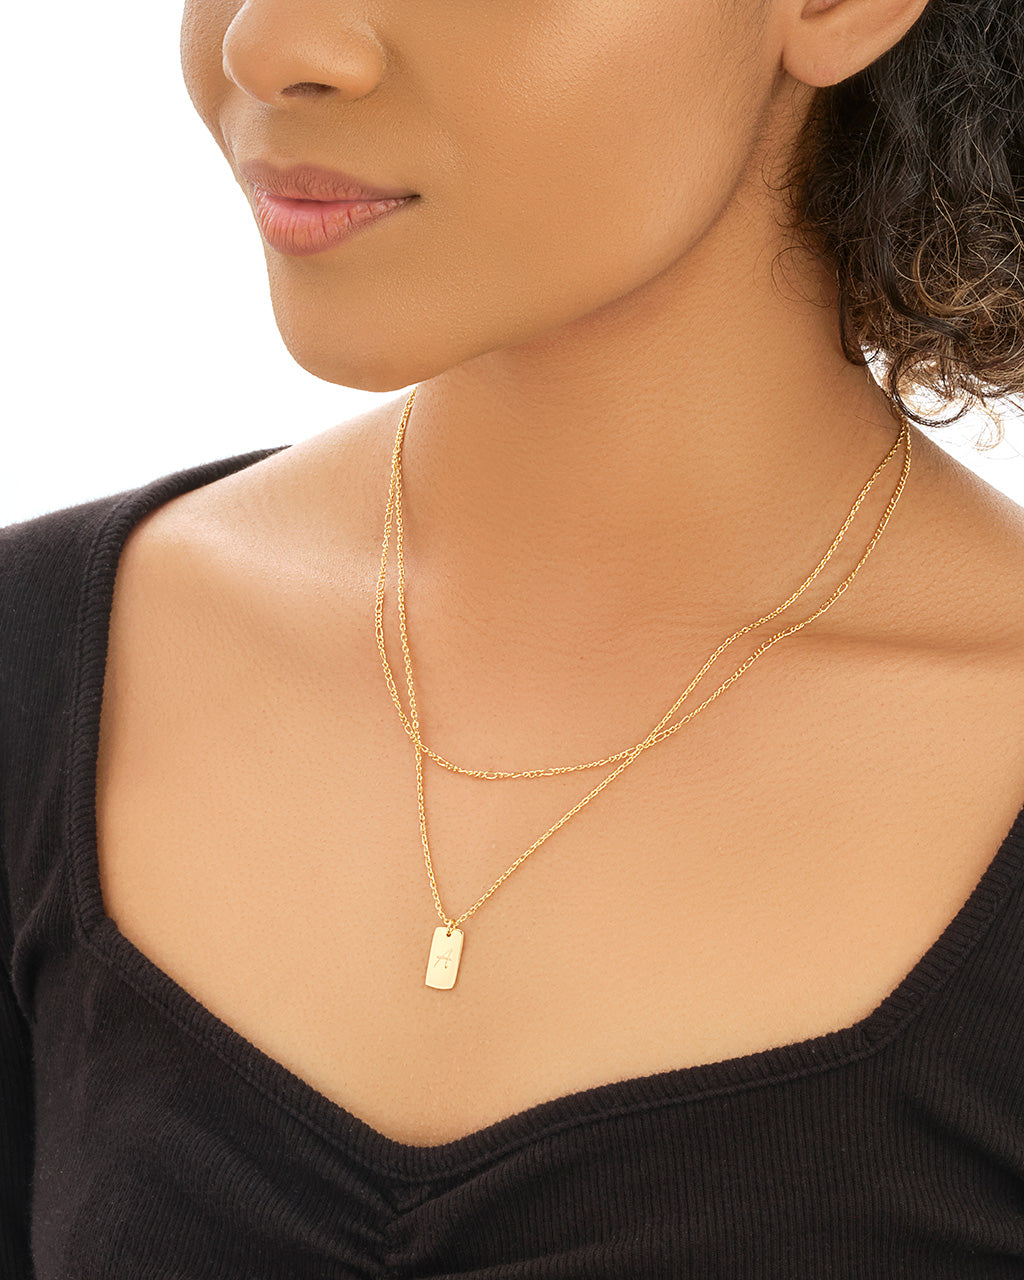 Classic tag necklace by Scosha | Finematter